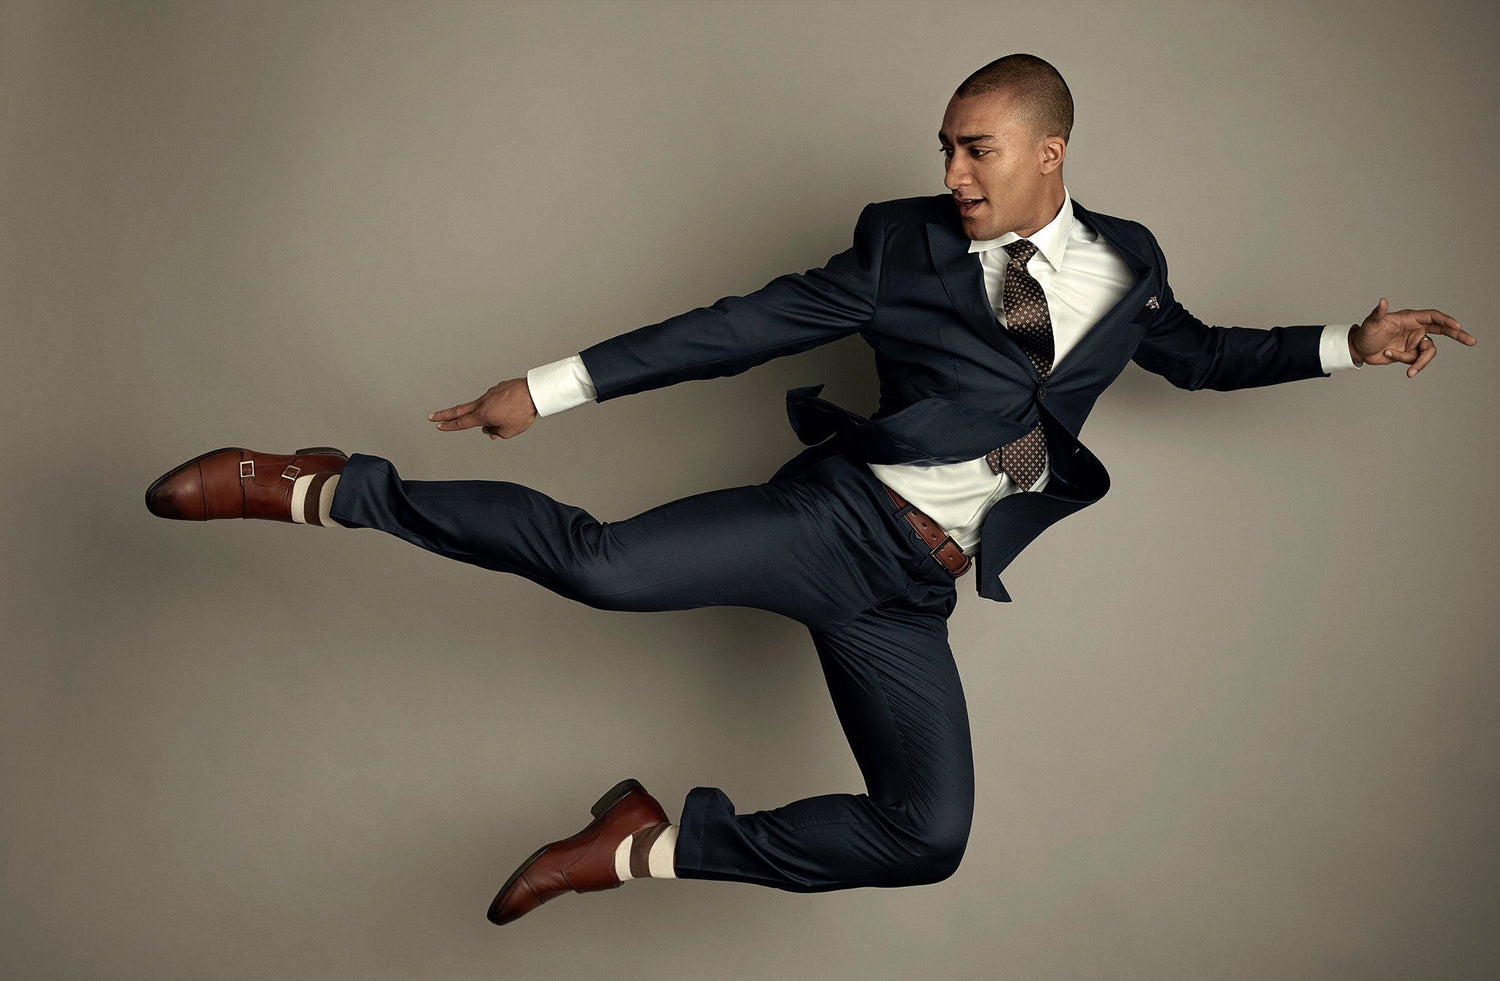 What Does Olympic Gold Medal Decathlete Ashton Eaton Look For In A Dress Shoe?